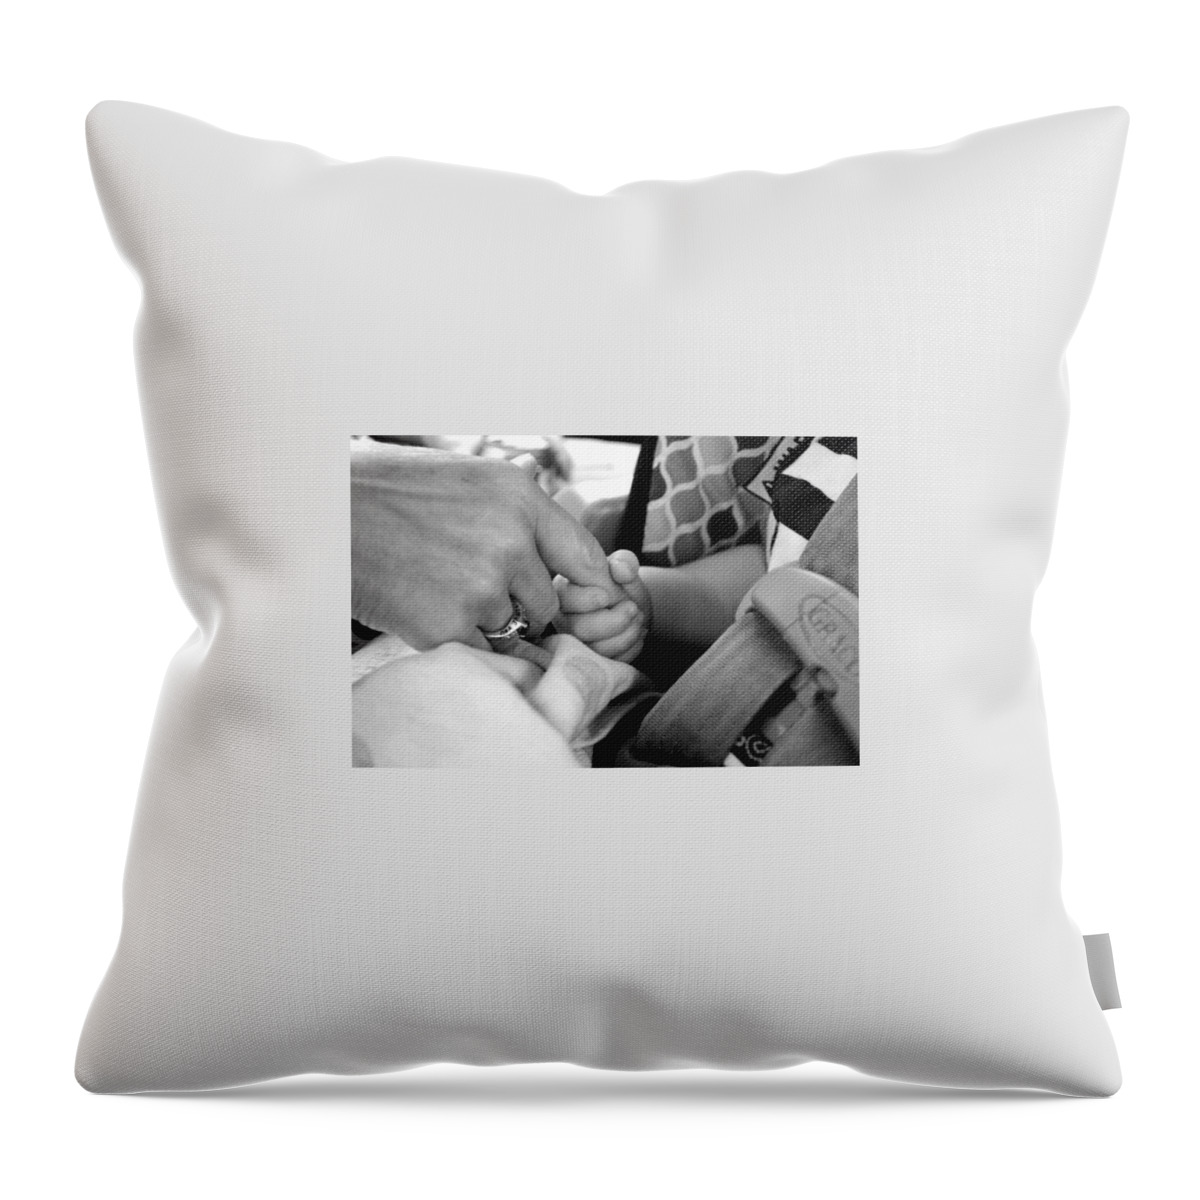 I Love You Ring With A Child Holding A Mother's Hand Throw Pillow featuring the photograph Hand of love by Carissa Kreuziger